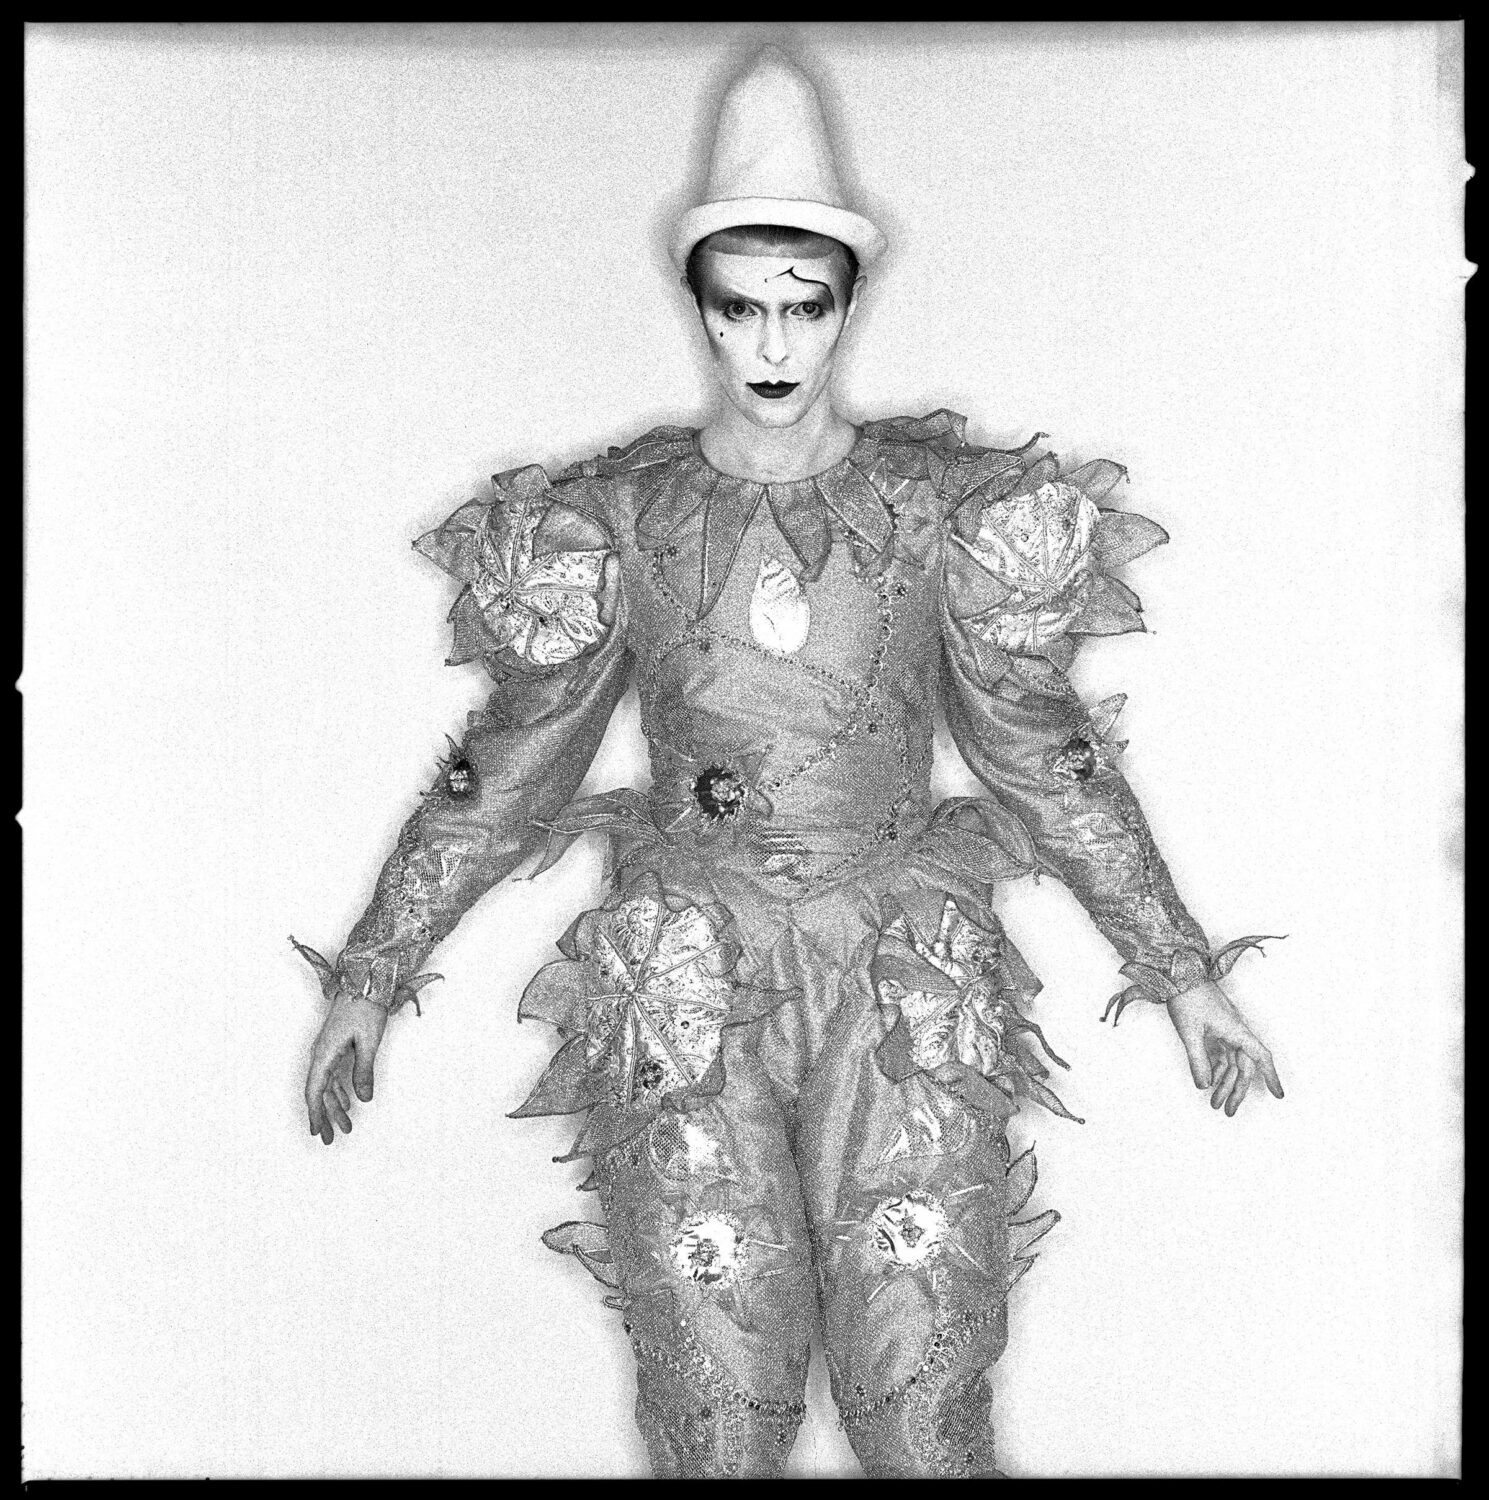 Brian Duffy: David Bowie (Scary Monster)